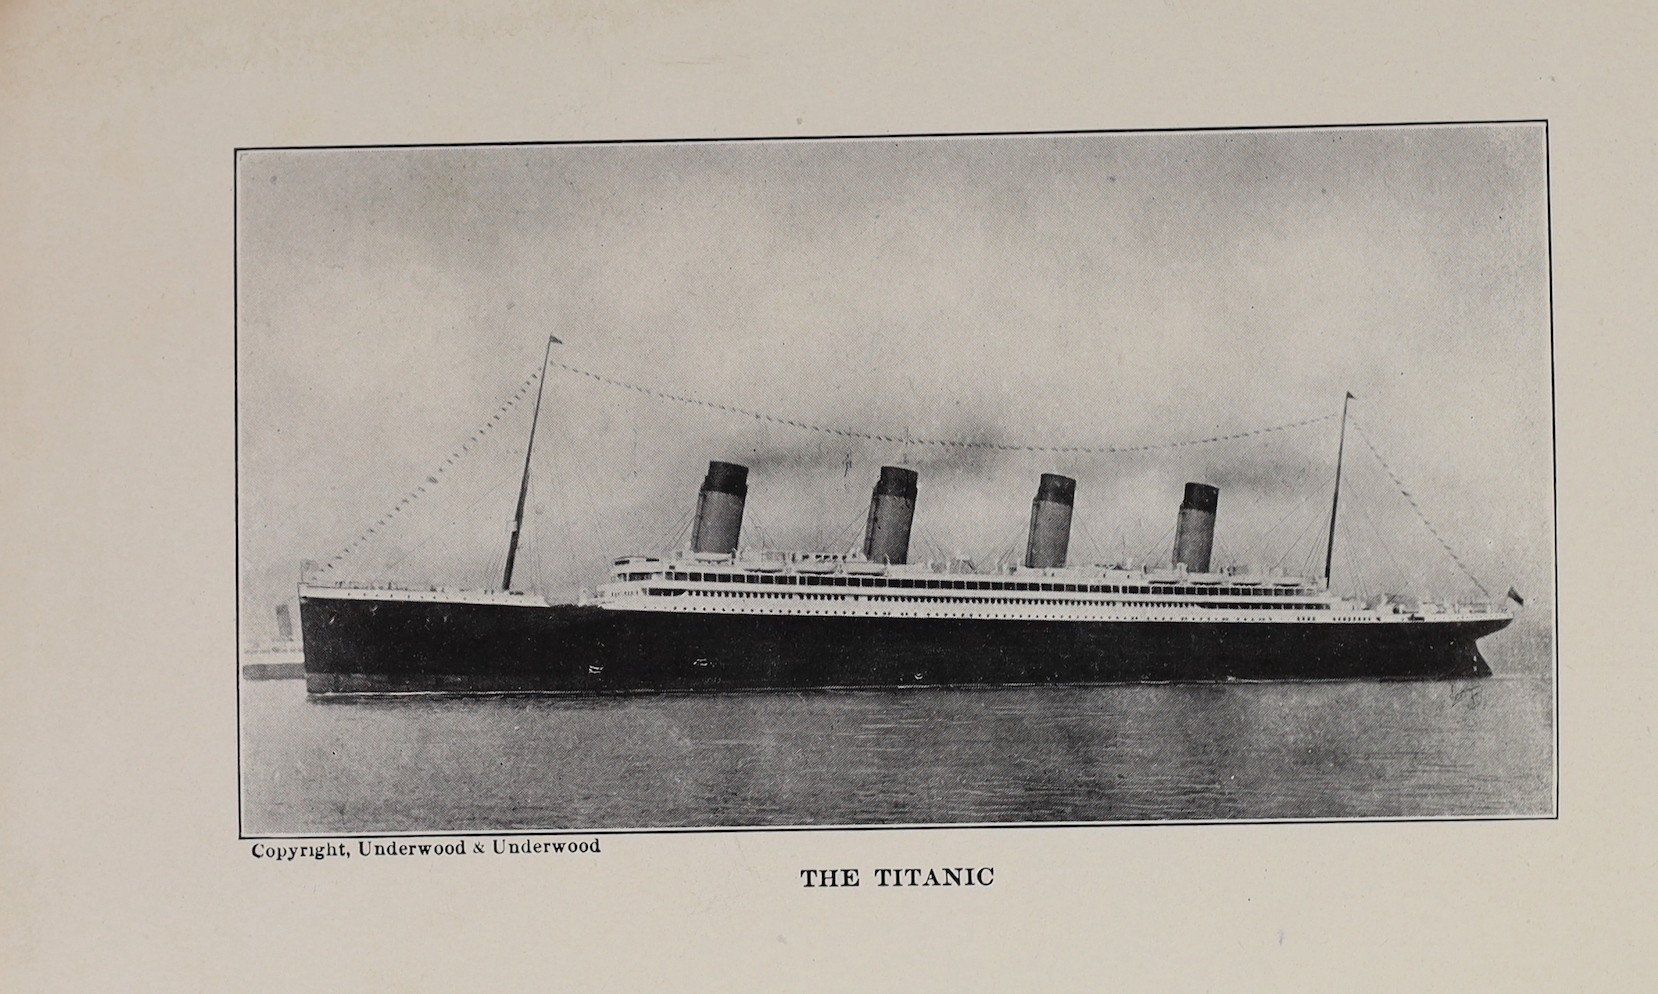 Beesley, Lawrence - The Loss of the SS. Titanic: its story and its lessons ... 3 photo plates & 2 folded plans; publisher's cloth. William Heinemann, 1912